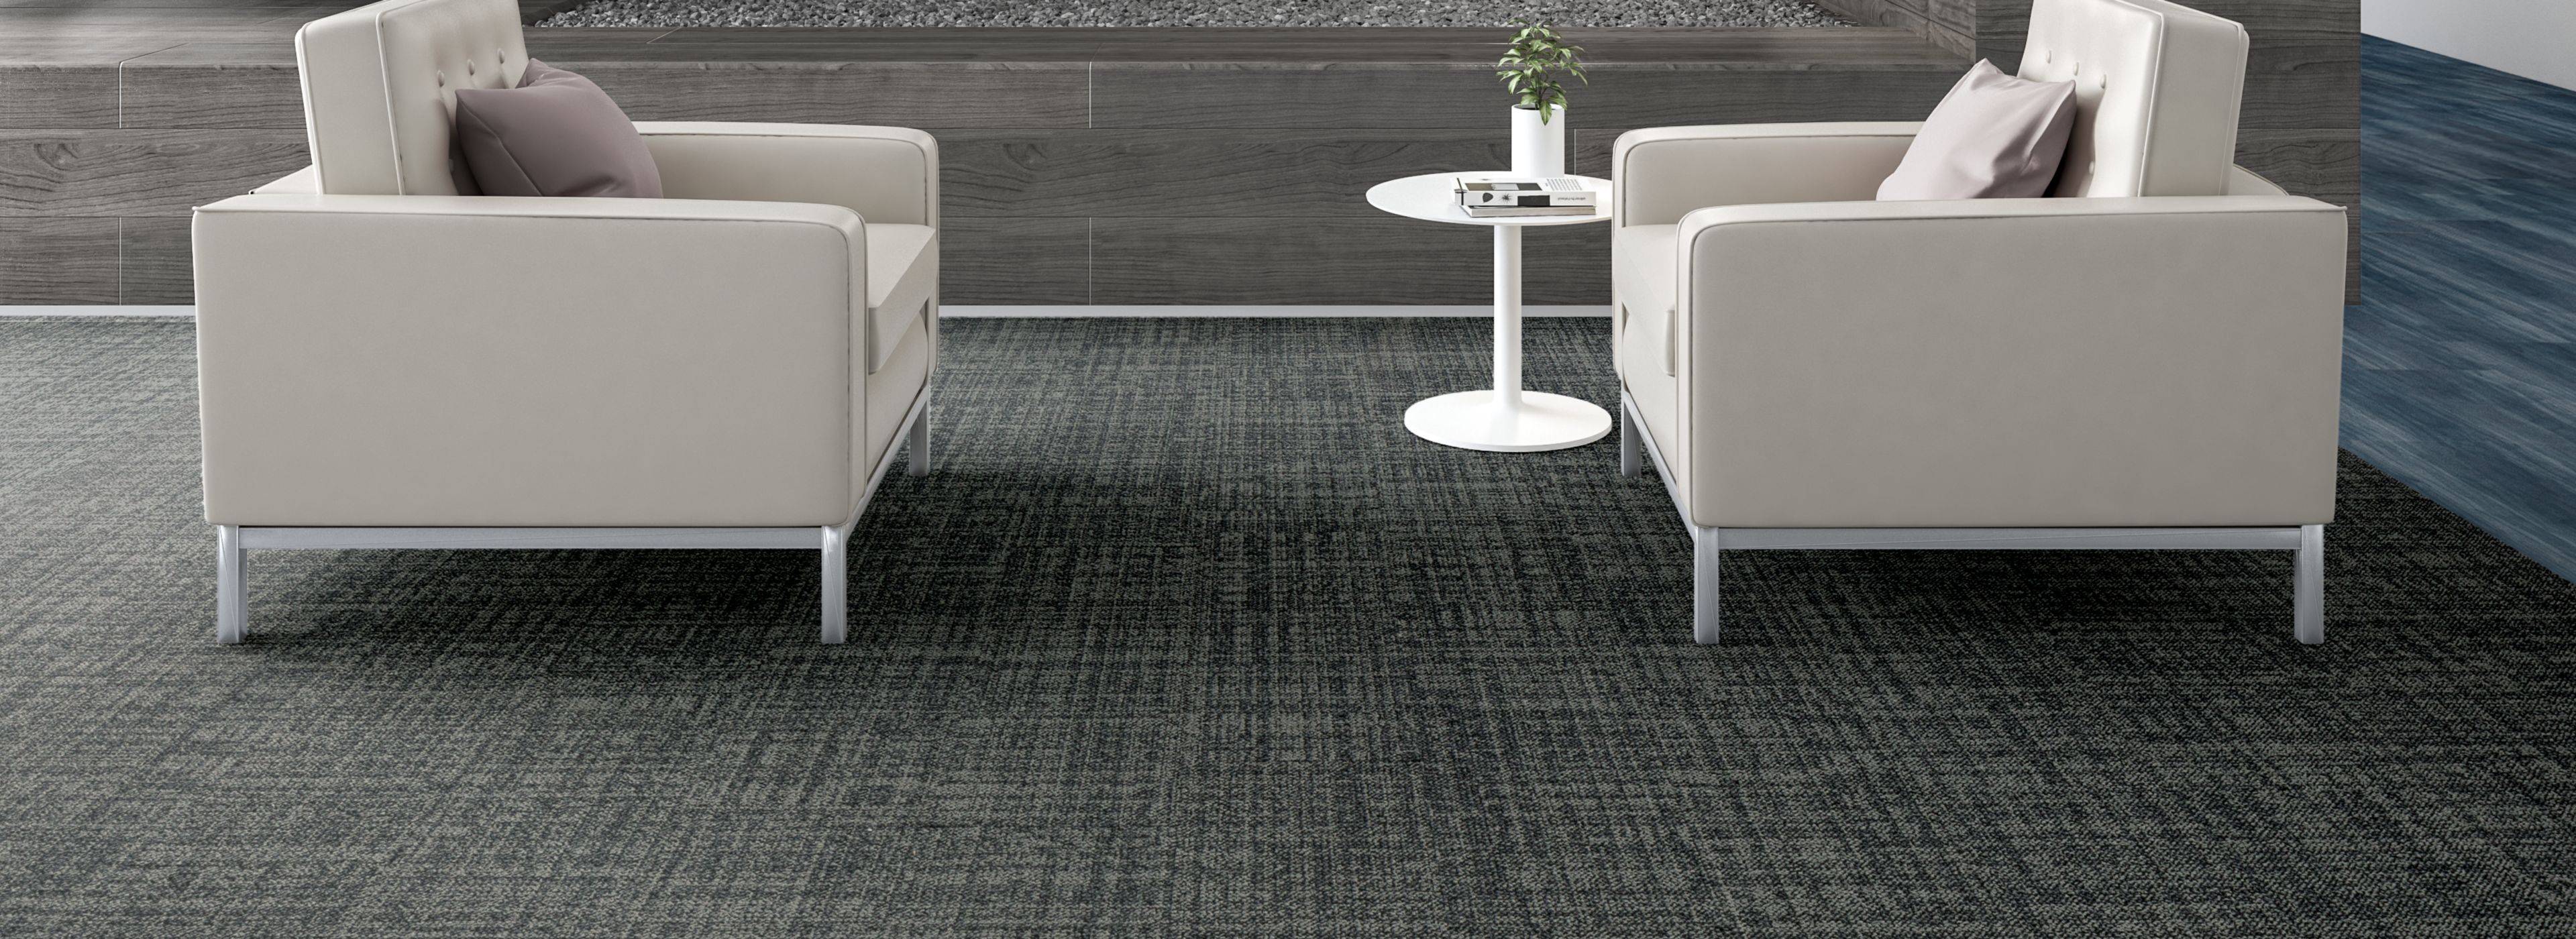 Interface Source Material plank carpet tile and Studio Set plank LVT in lobby with two white chairs and stairs numéro d’image 1